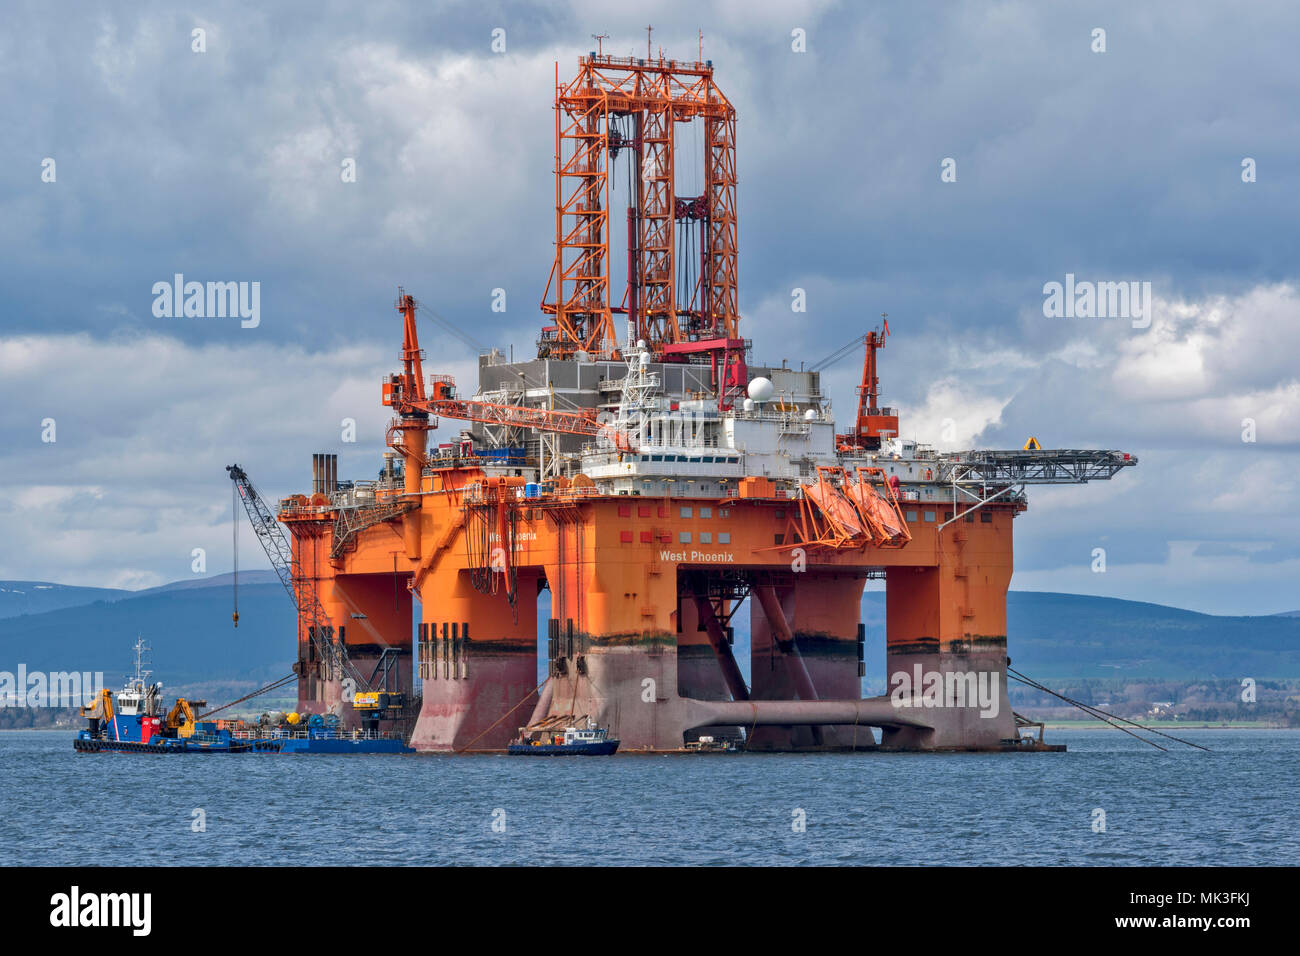 CROMARTY FIRTH SCOTLAND  DECOMMISSIONED OR REPAIRED OIL RIG WEST PHOENIX LYING OFF CROMARTY VILLAGE Stock Photo